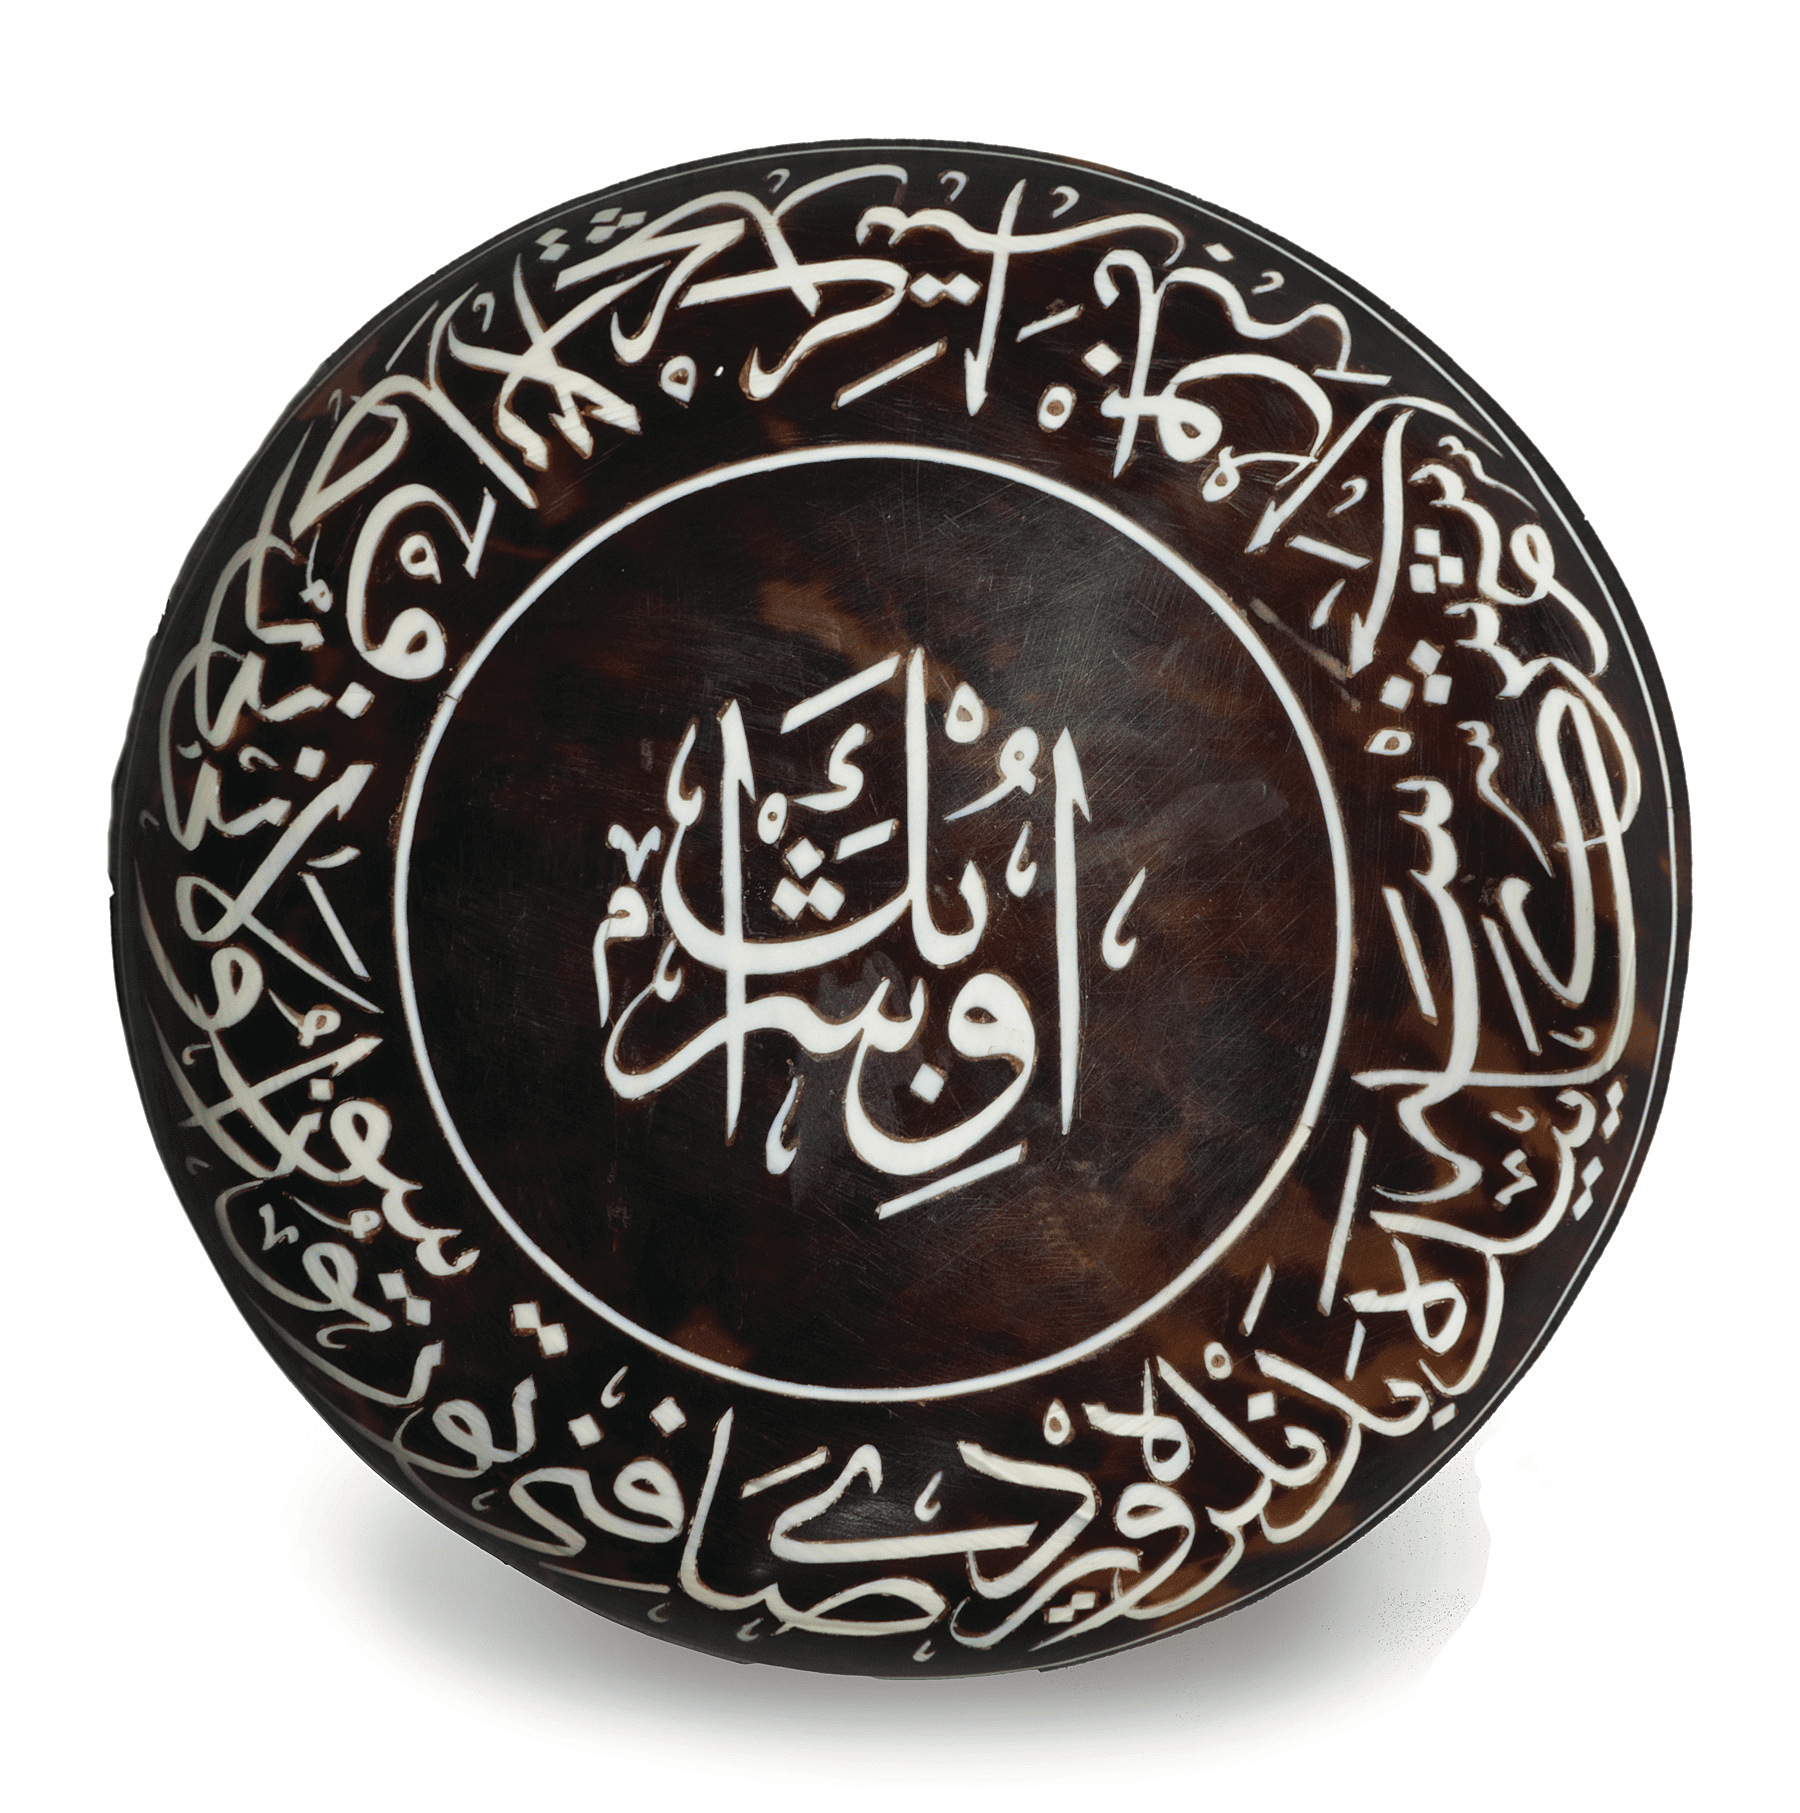 A tortoise-shell bowl with inlaid design of Arabic writing.